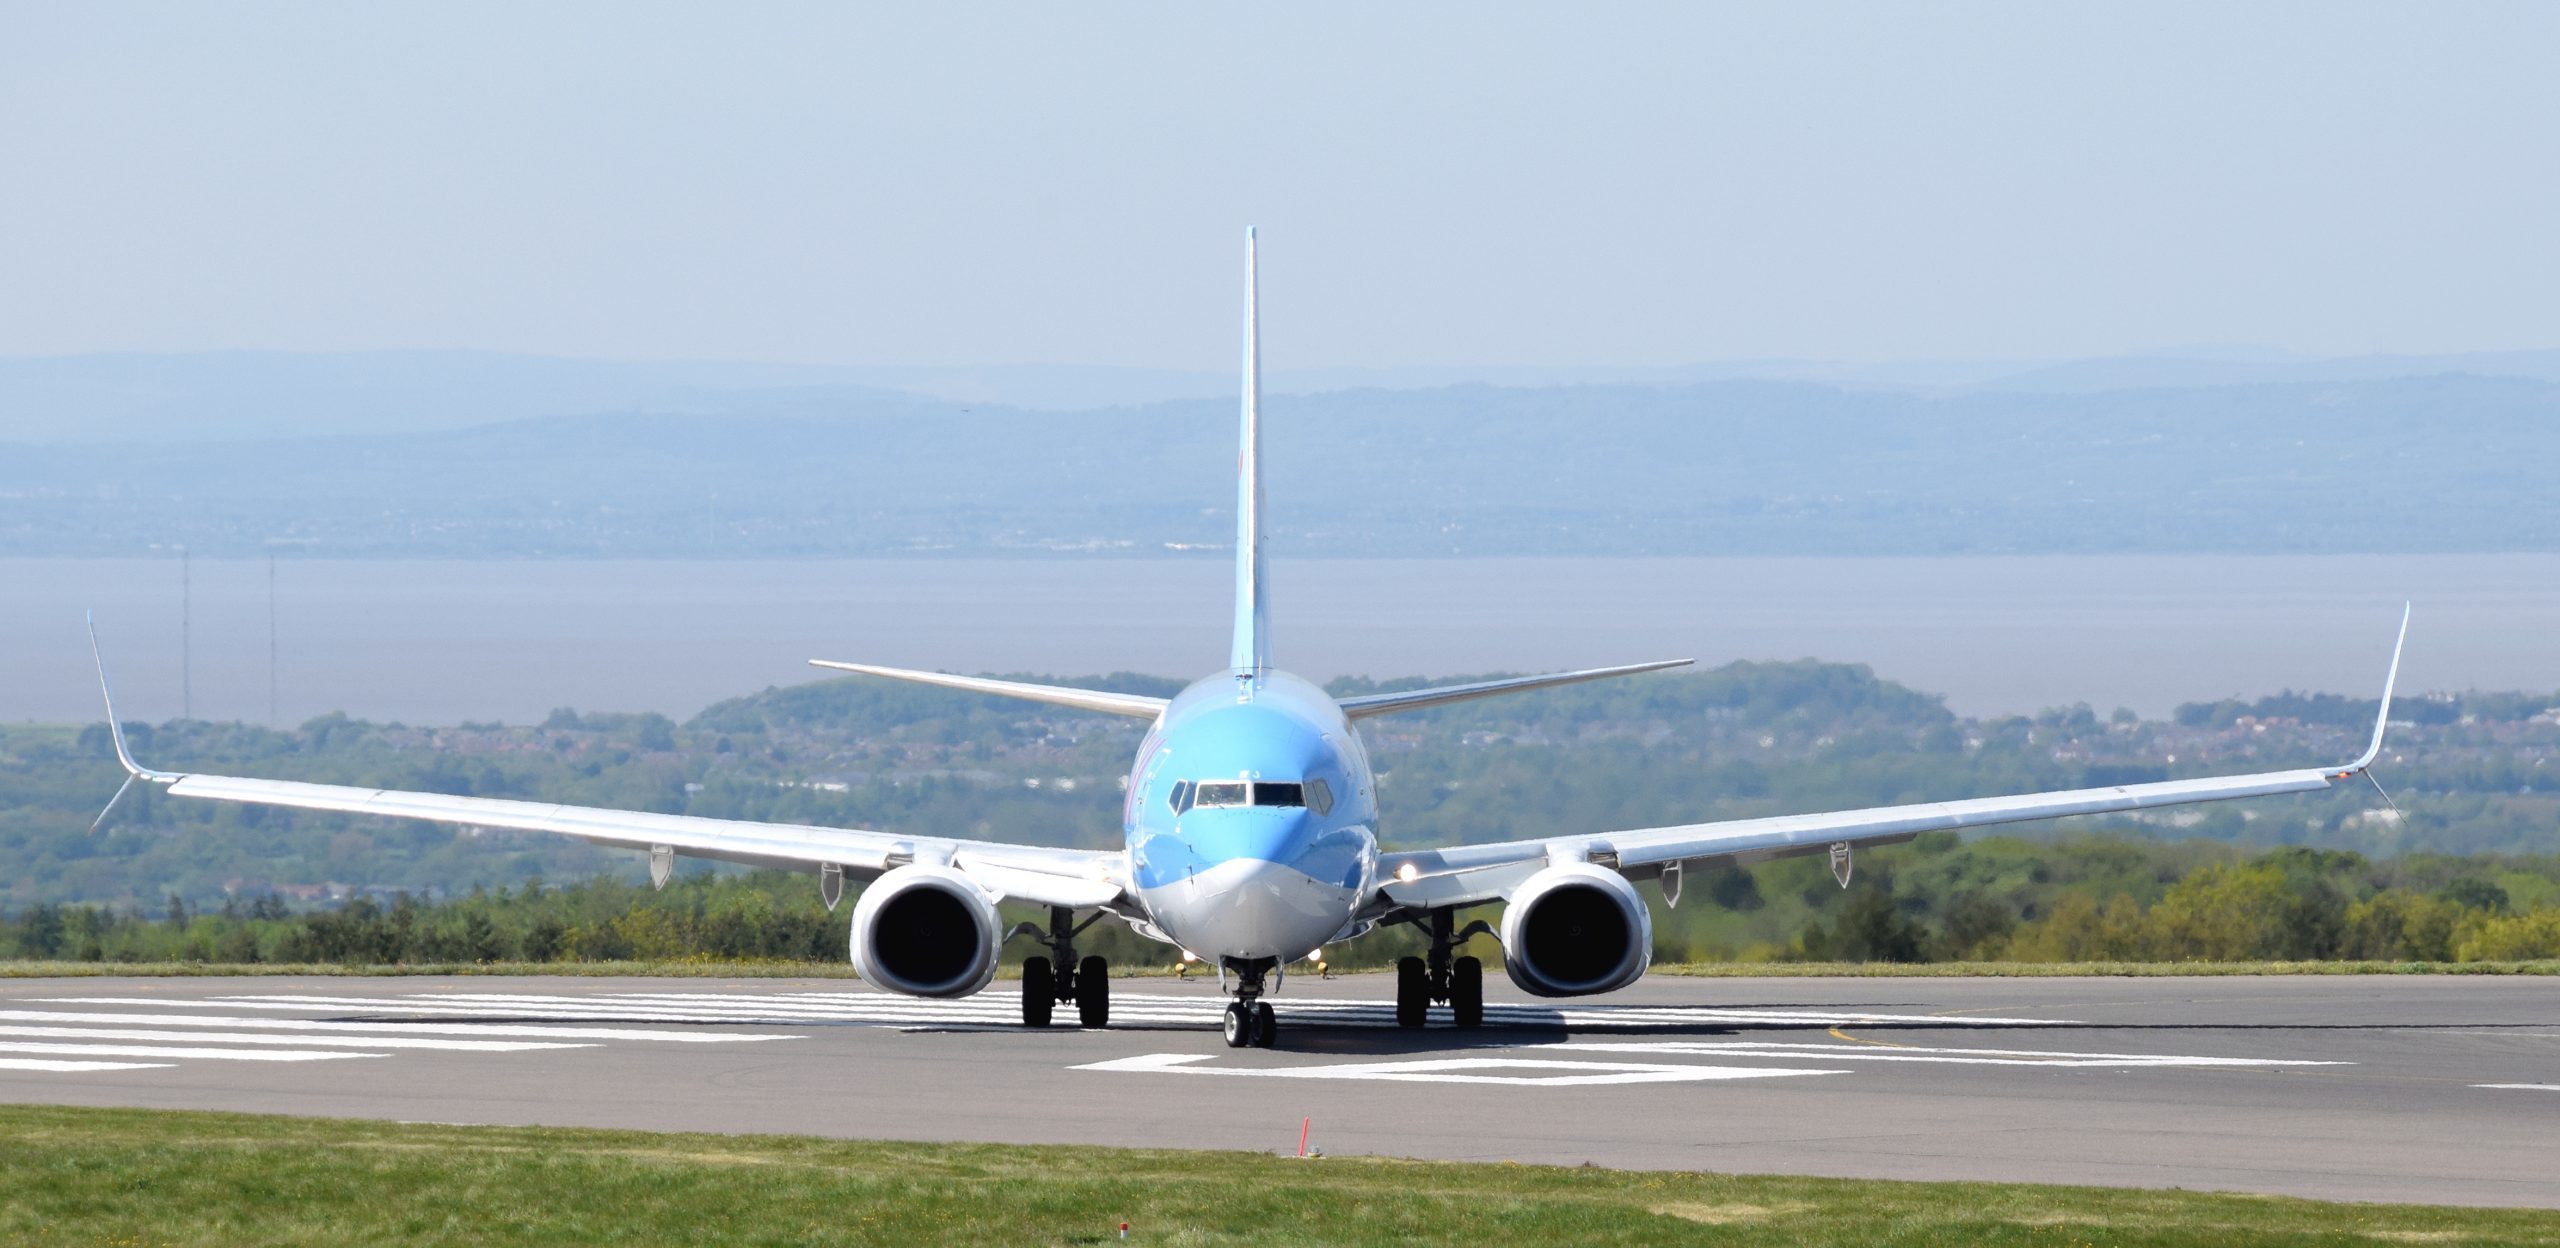 A blue and white Boeing 737-800 aircraft facing the camera, moving down the airport runway. Water and low mountains in the background.